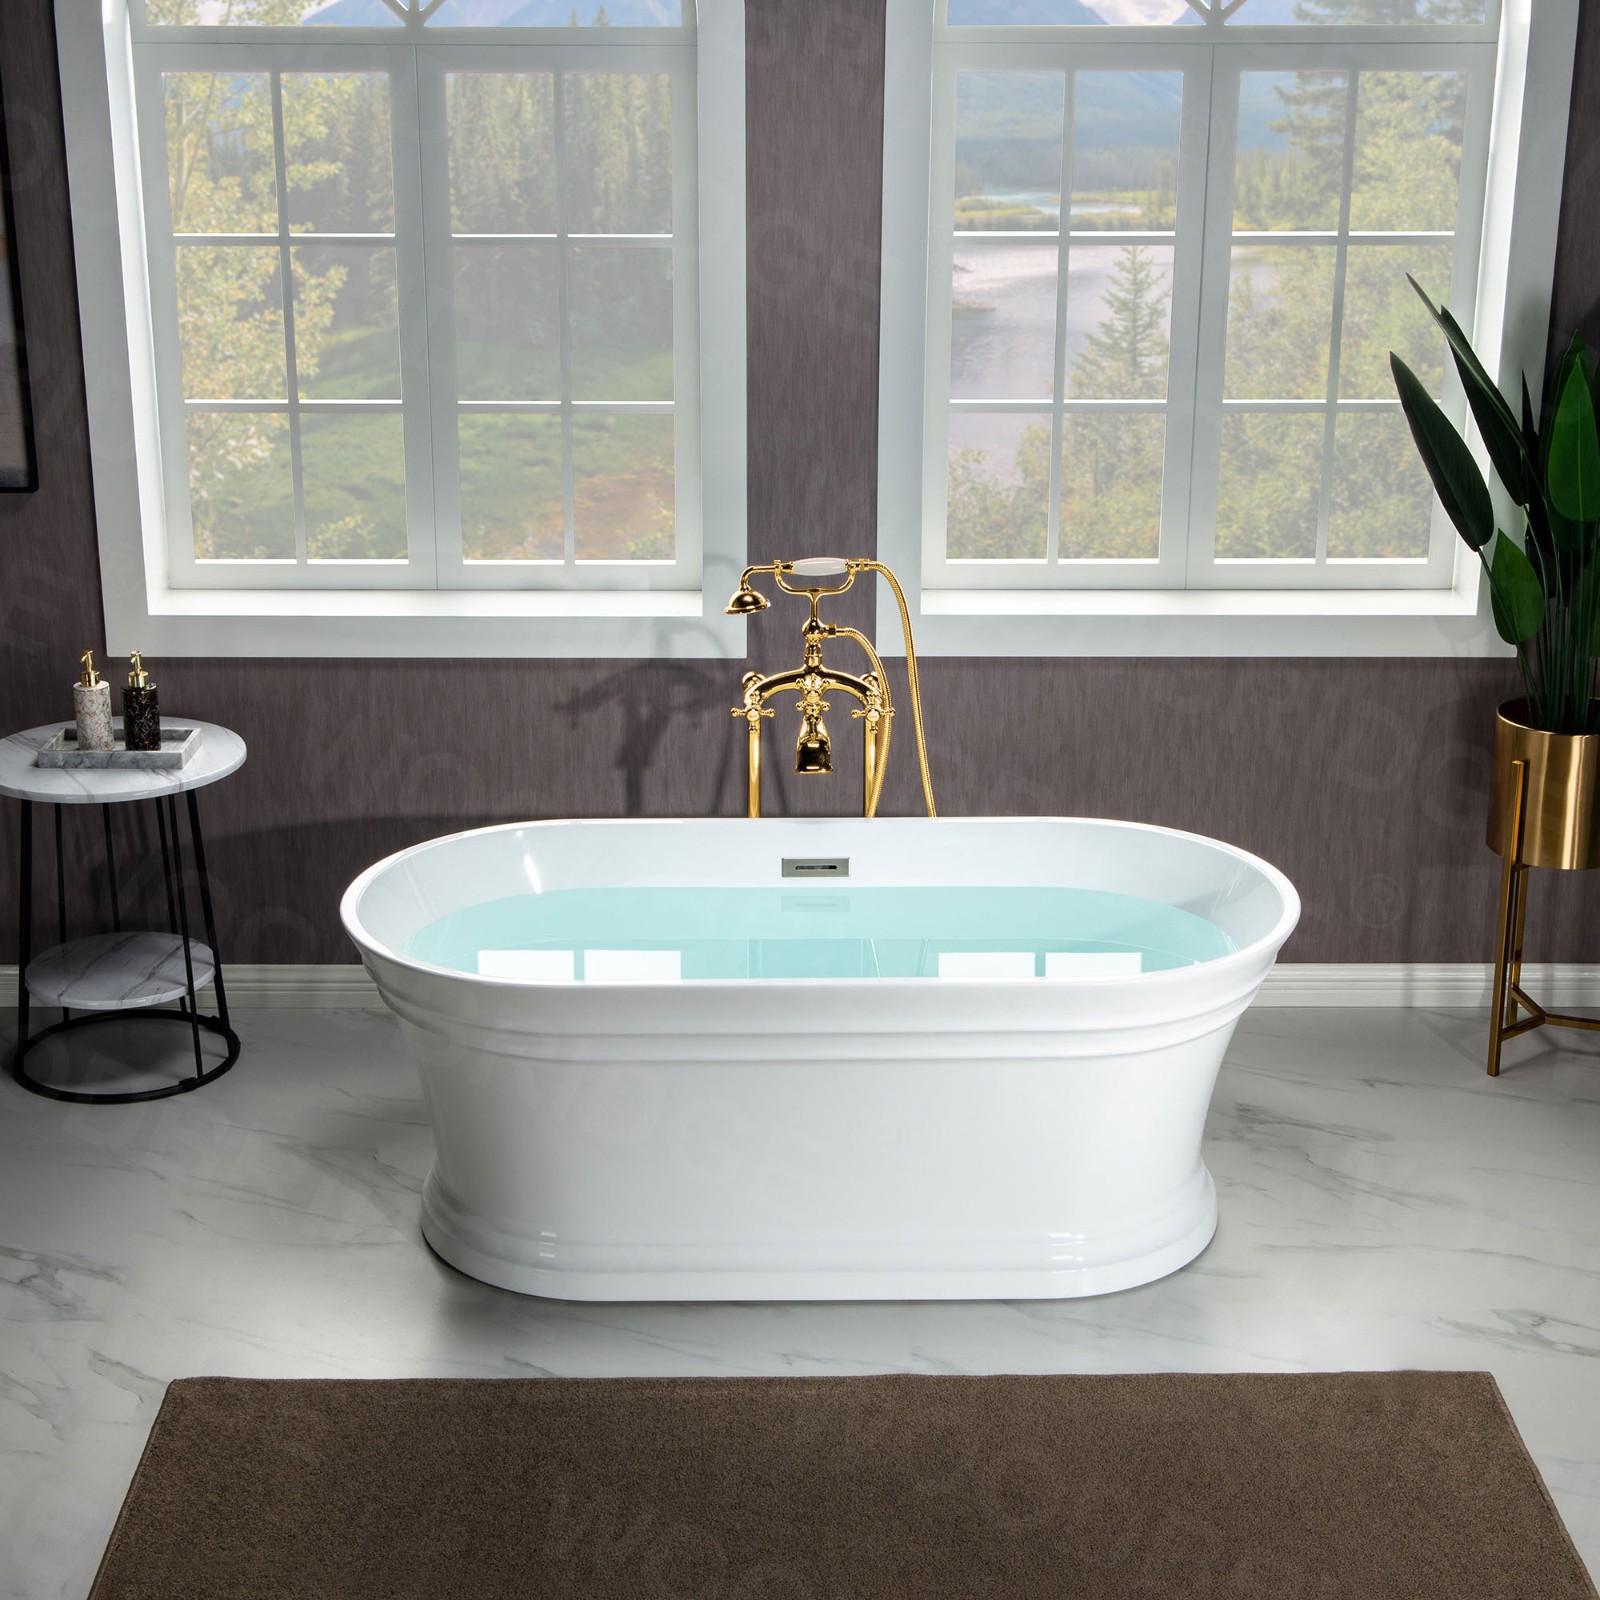  WOODBRIDGE 67 in. Freestanding Double Ended Acrylic Soaking Bathtub with Center Drain Assembly and Overflow, BTA1537/B1537, Glossy White_7695